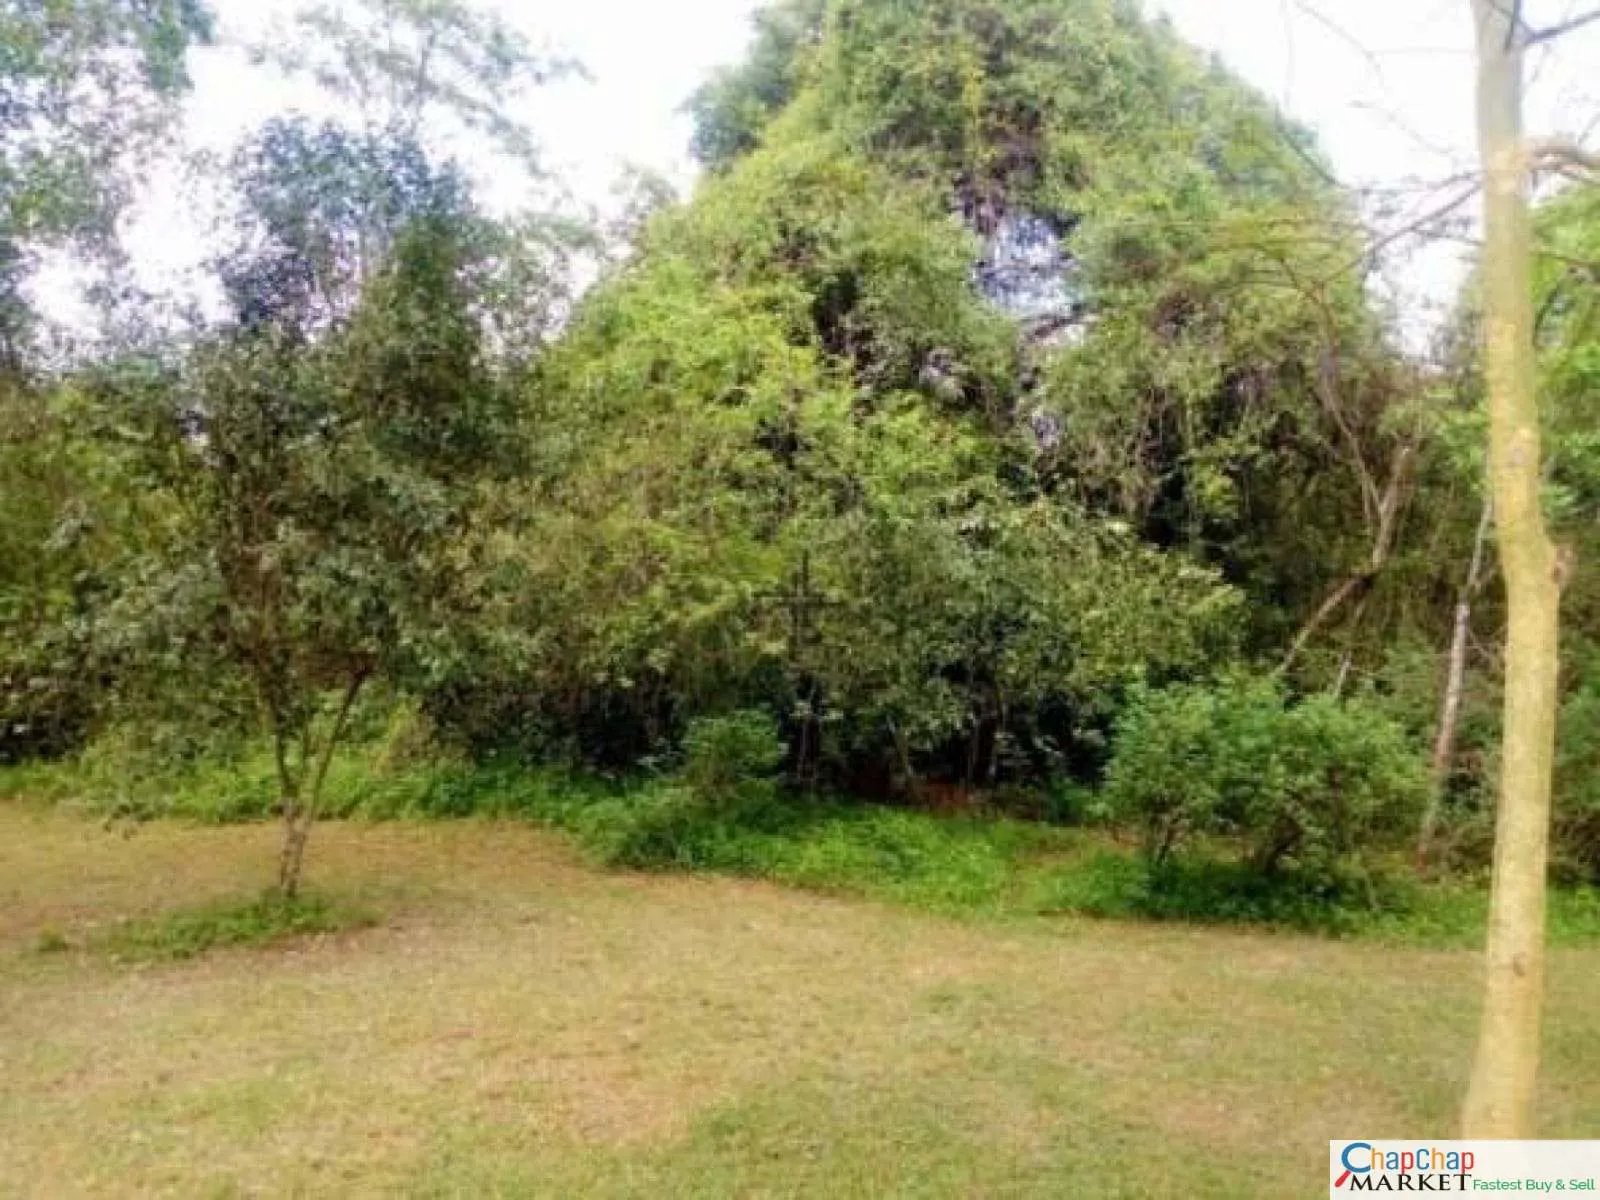 Real Estate Land For Sale-Land for sale in Karen Ready Title Deed QUICK SALE🔥1/2 acre gated community Kufuga Road